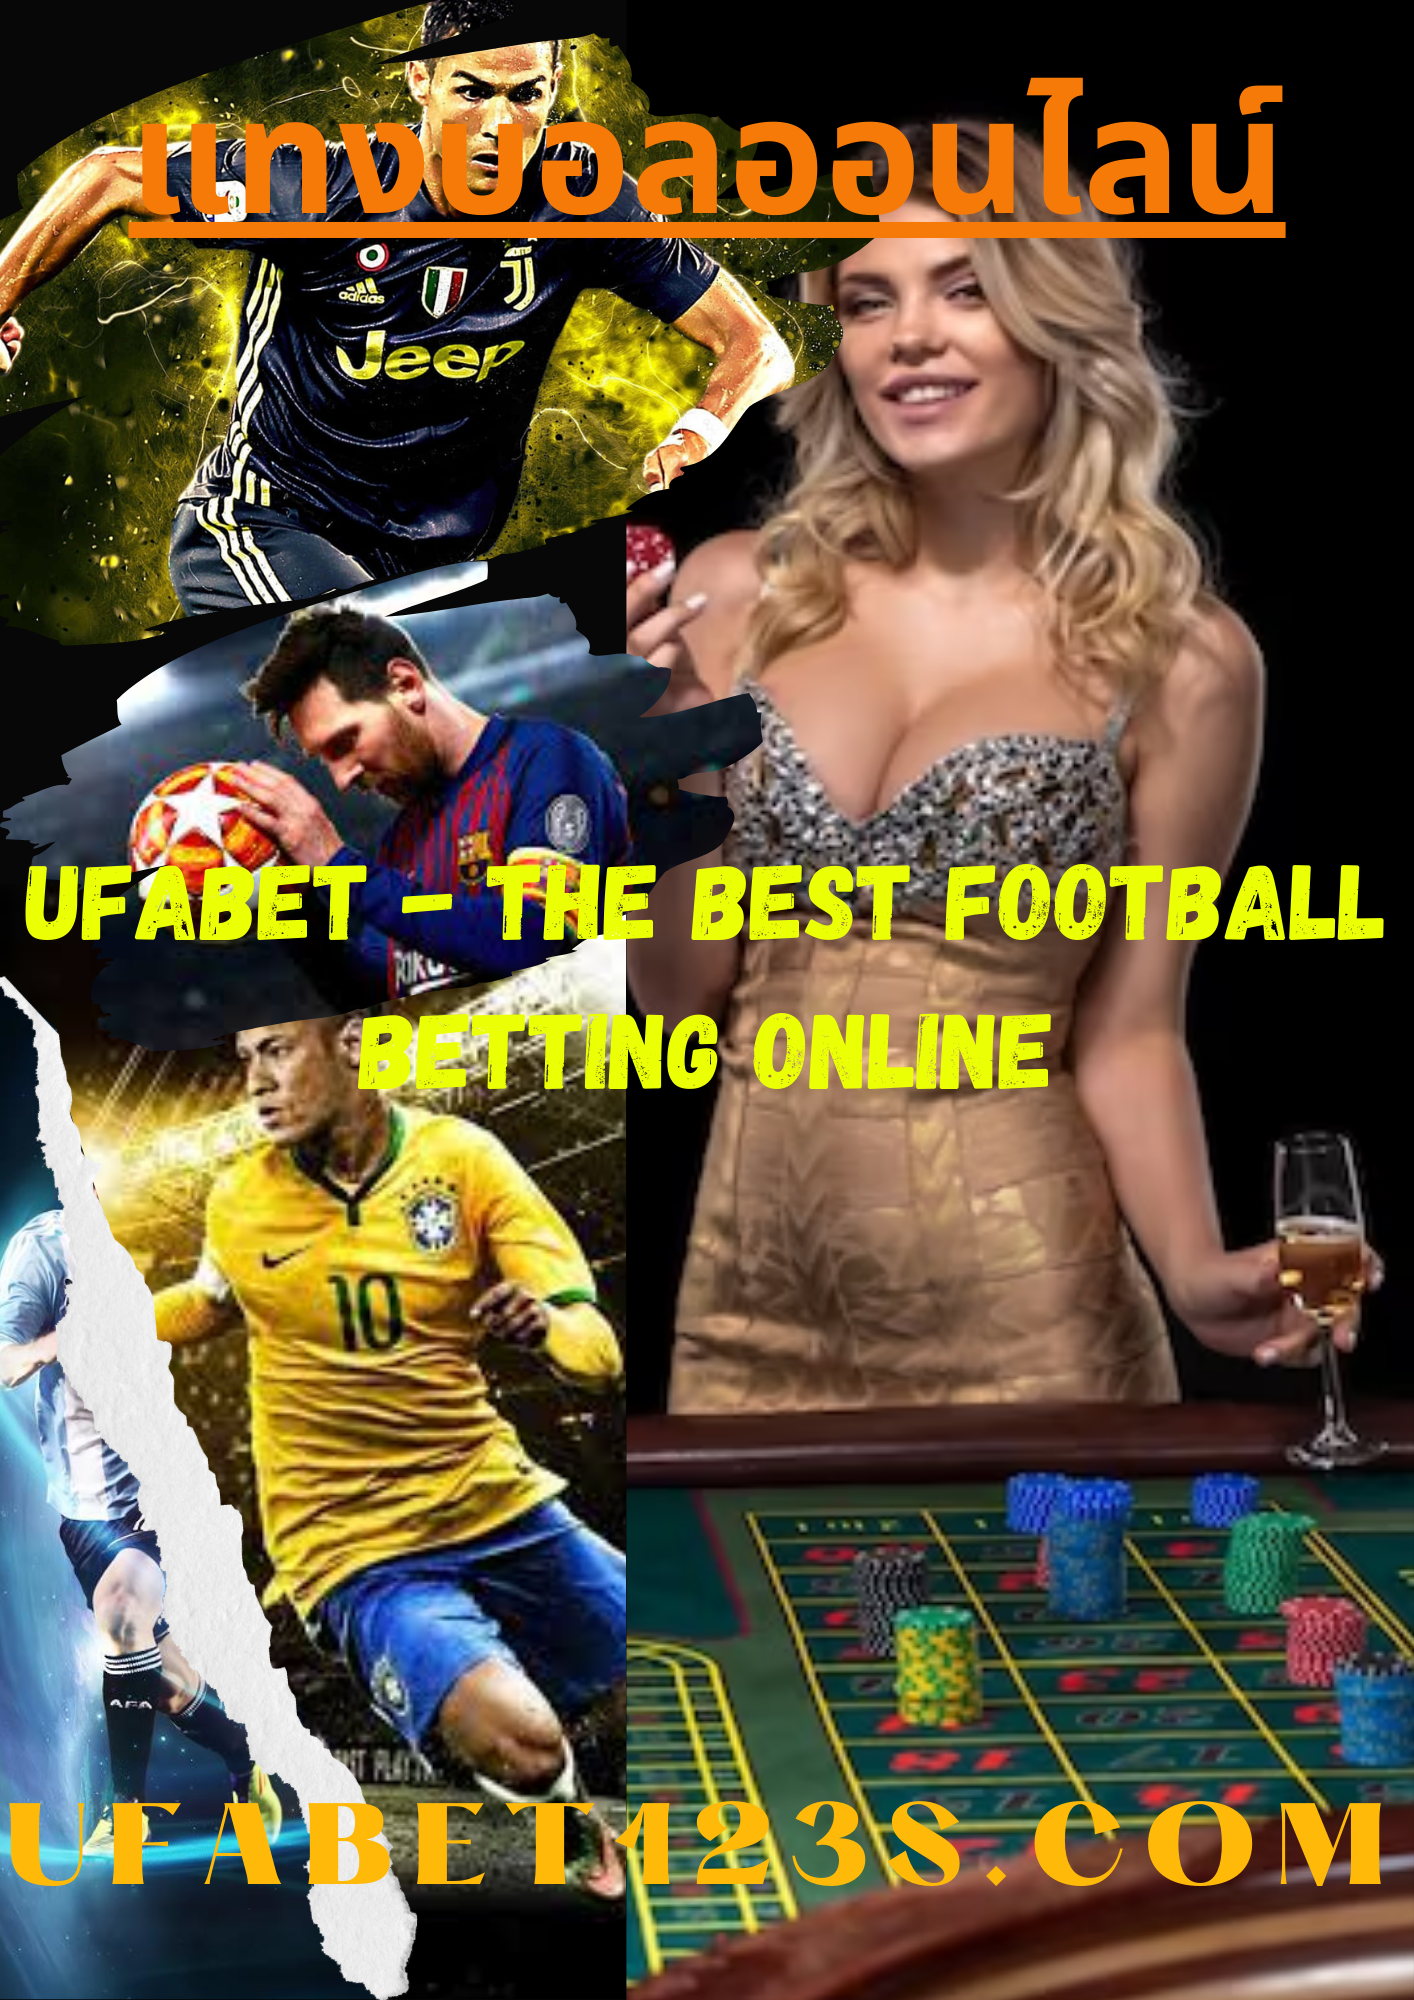 UFABET-THE BEST FOOTBALL BETTING ONLINE by max on Dribbble